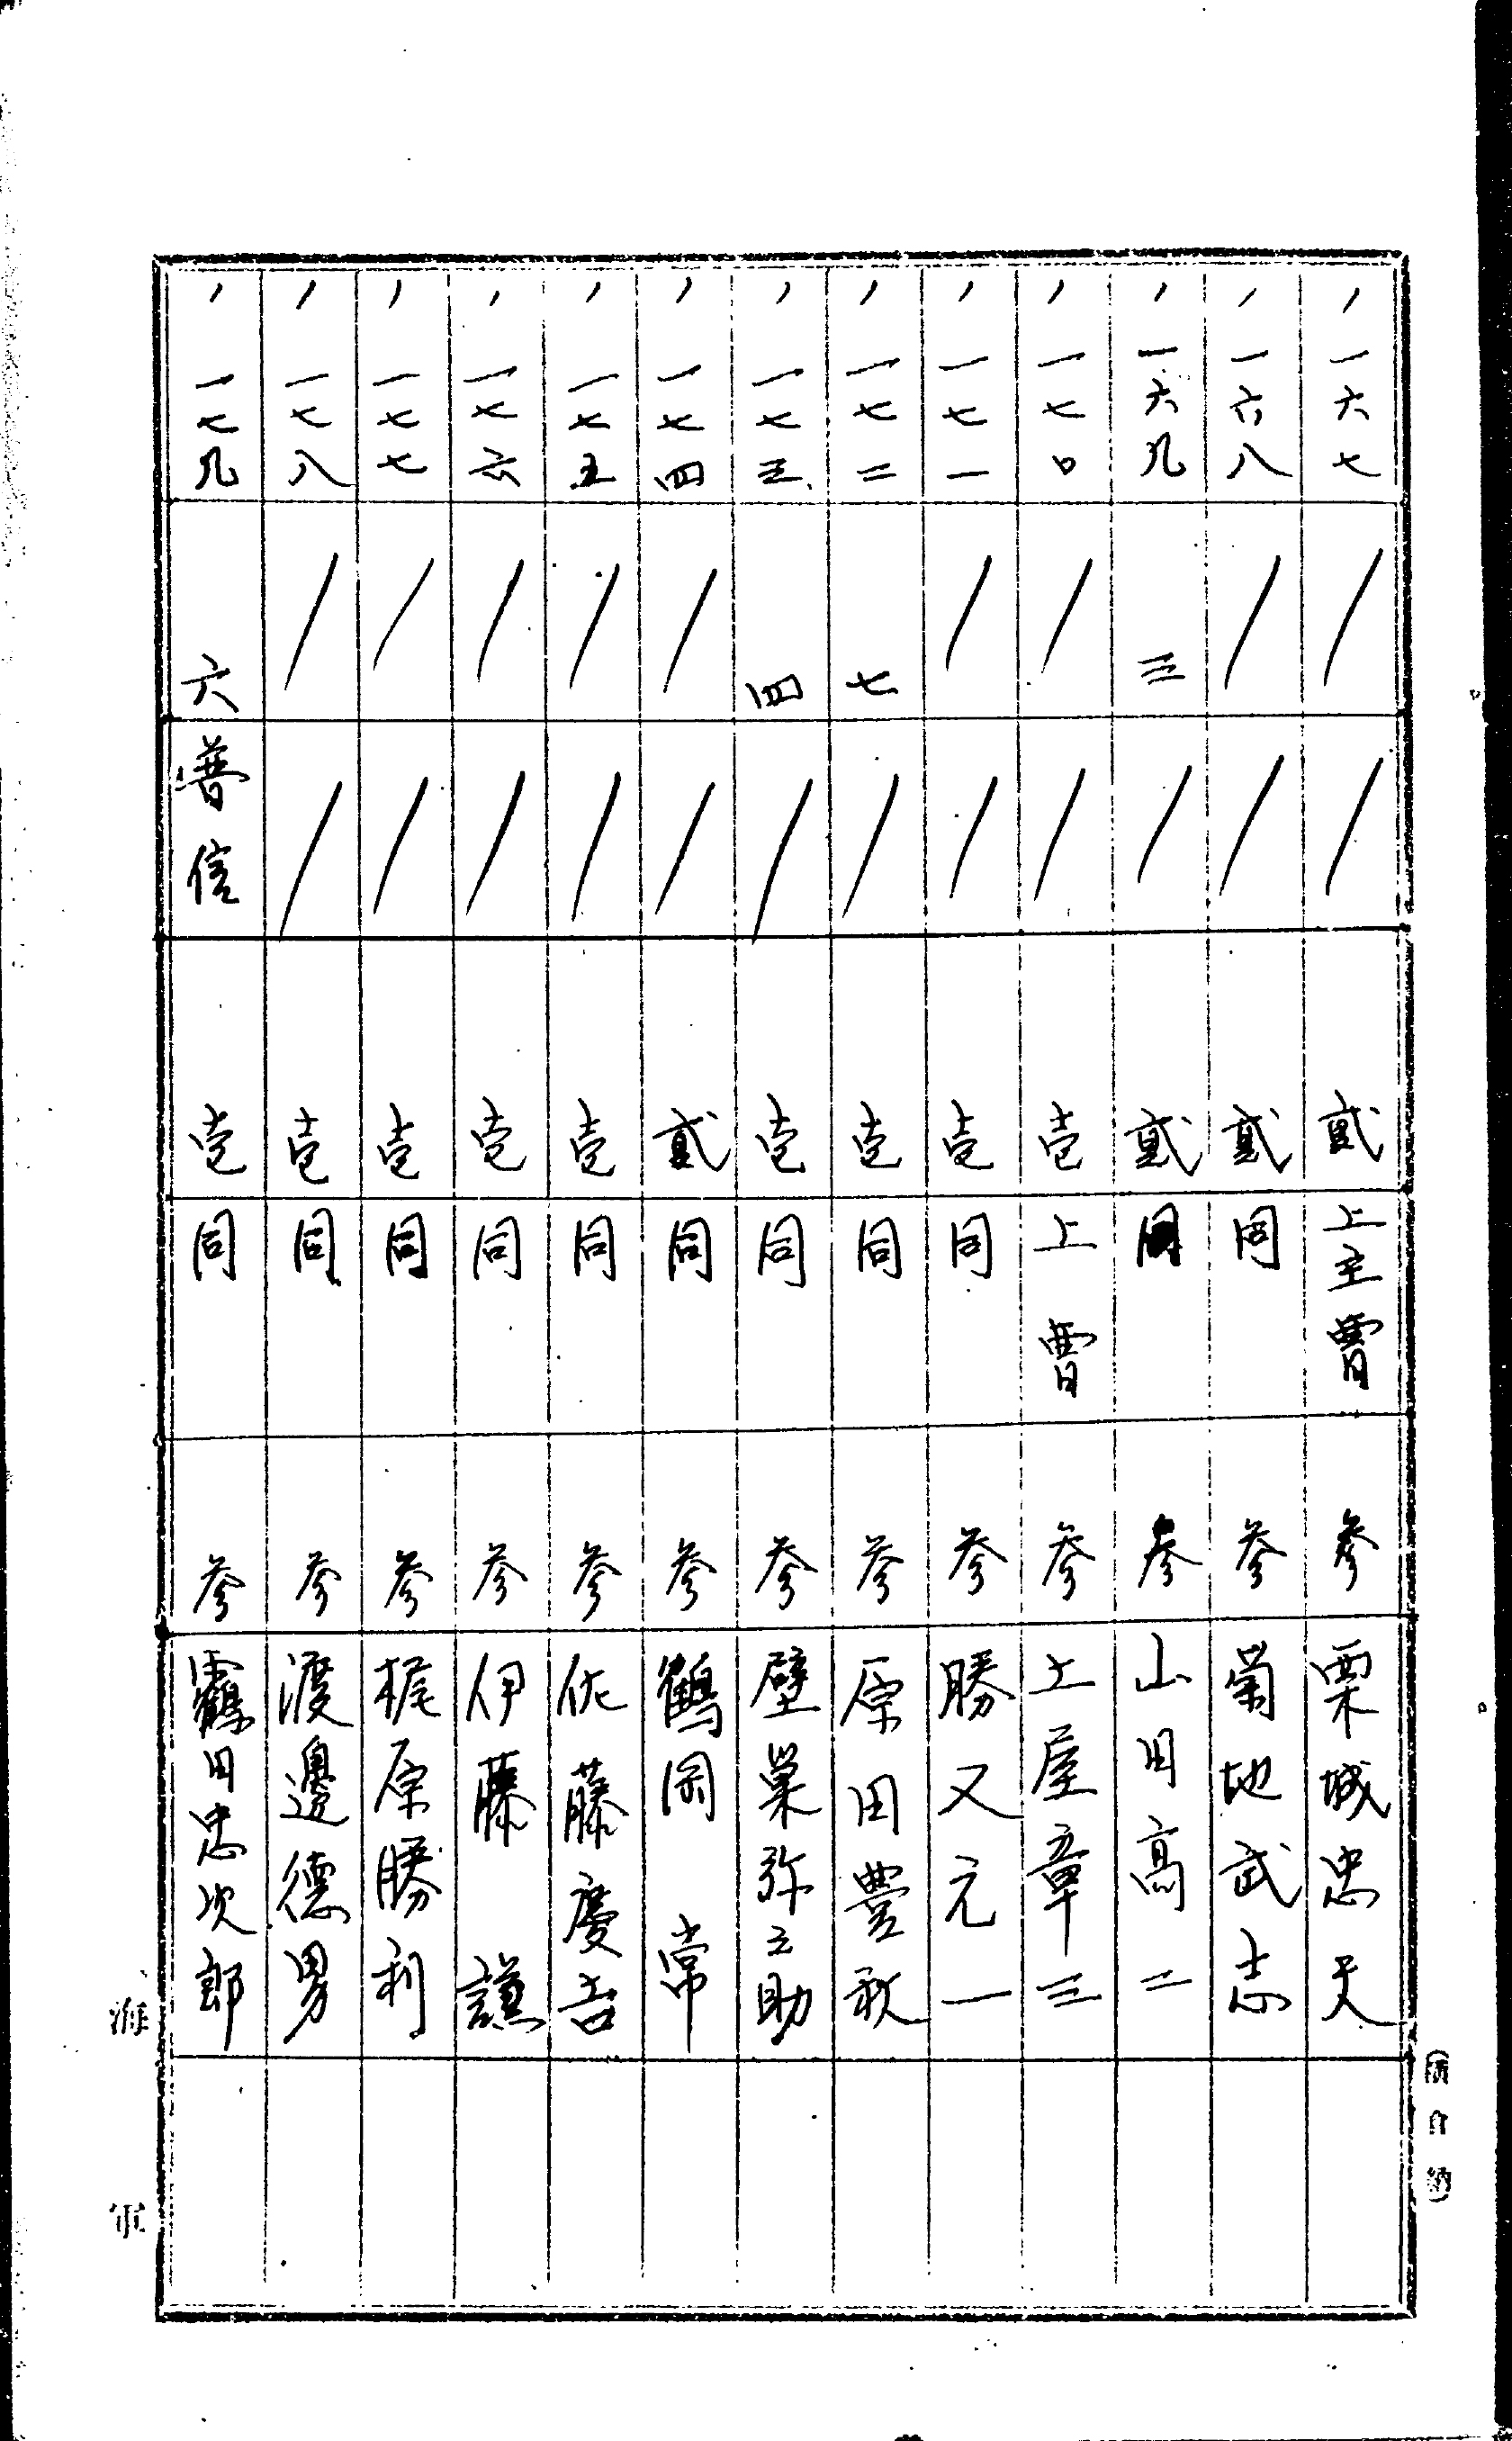 The letter from Harada and two of the pocket handbooks in which Tomigorō wrote his diary.